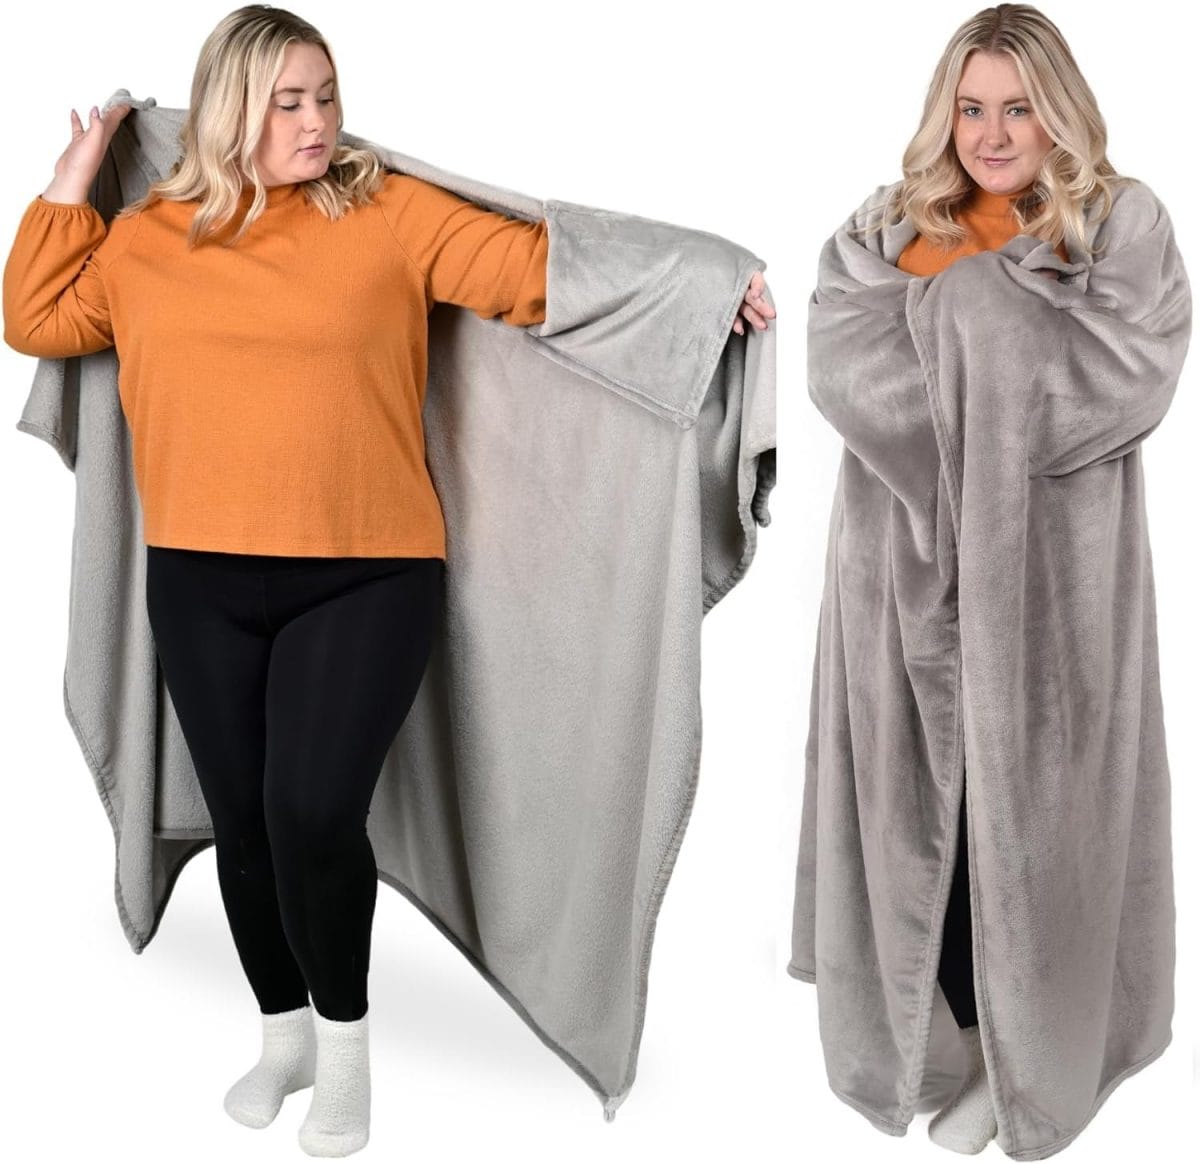 The Wearable Throw Blanket and Cape in One, A Soft Cozy Fleece Blanket with Sleeves, Gifts for her, Fall Gifts, Birthday Gifts for Women Who Have Everything, Get Well Gifts - Silver Gray